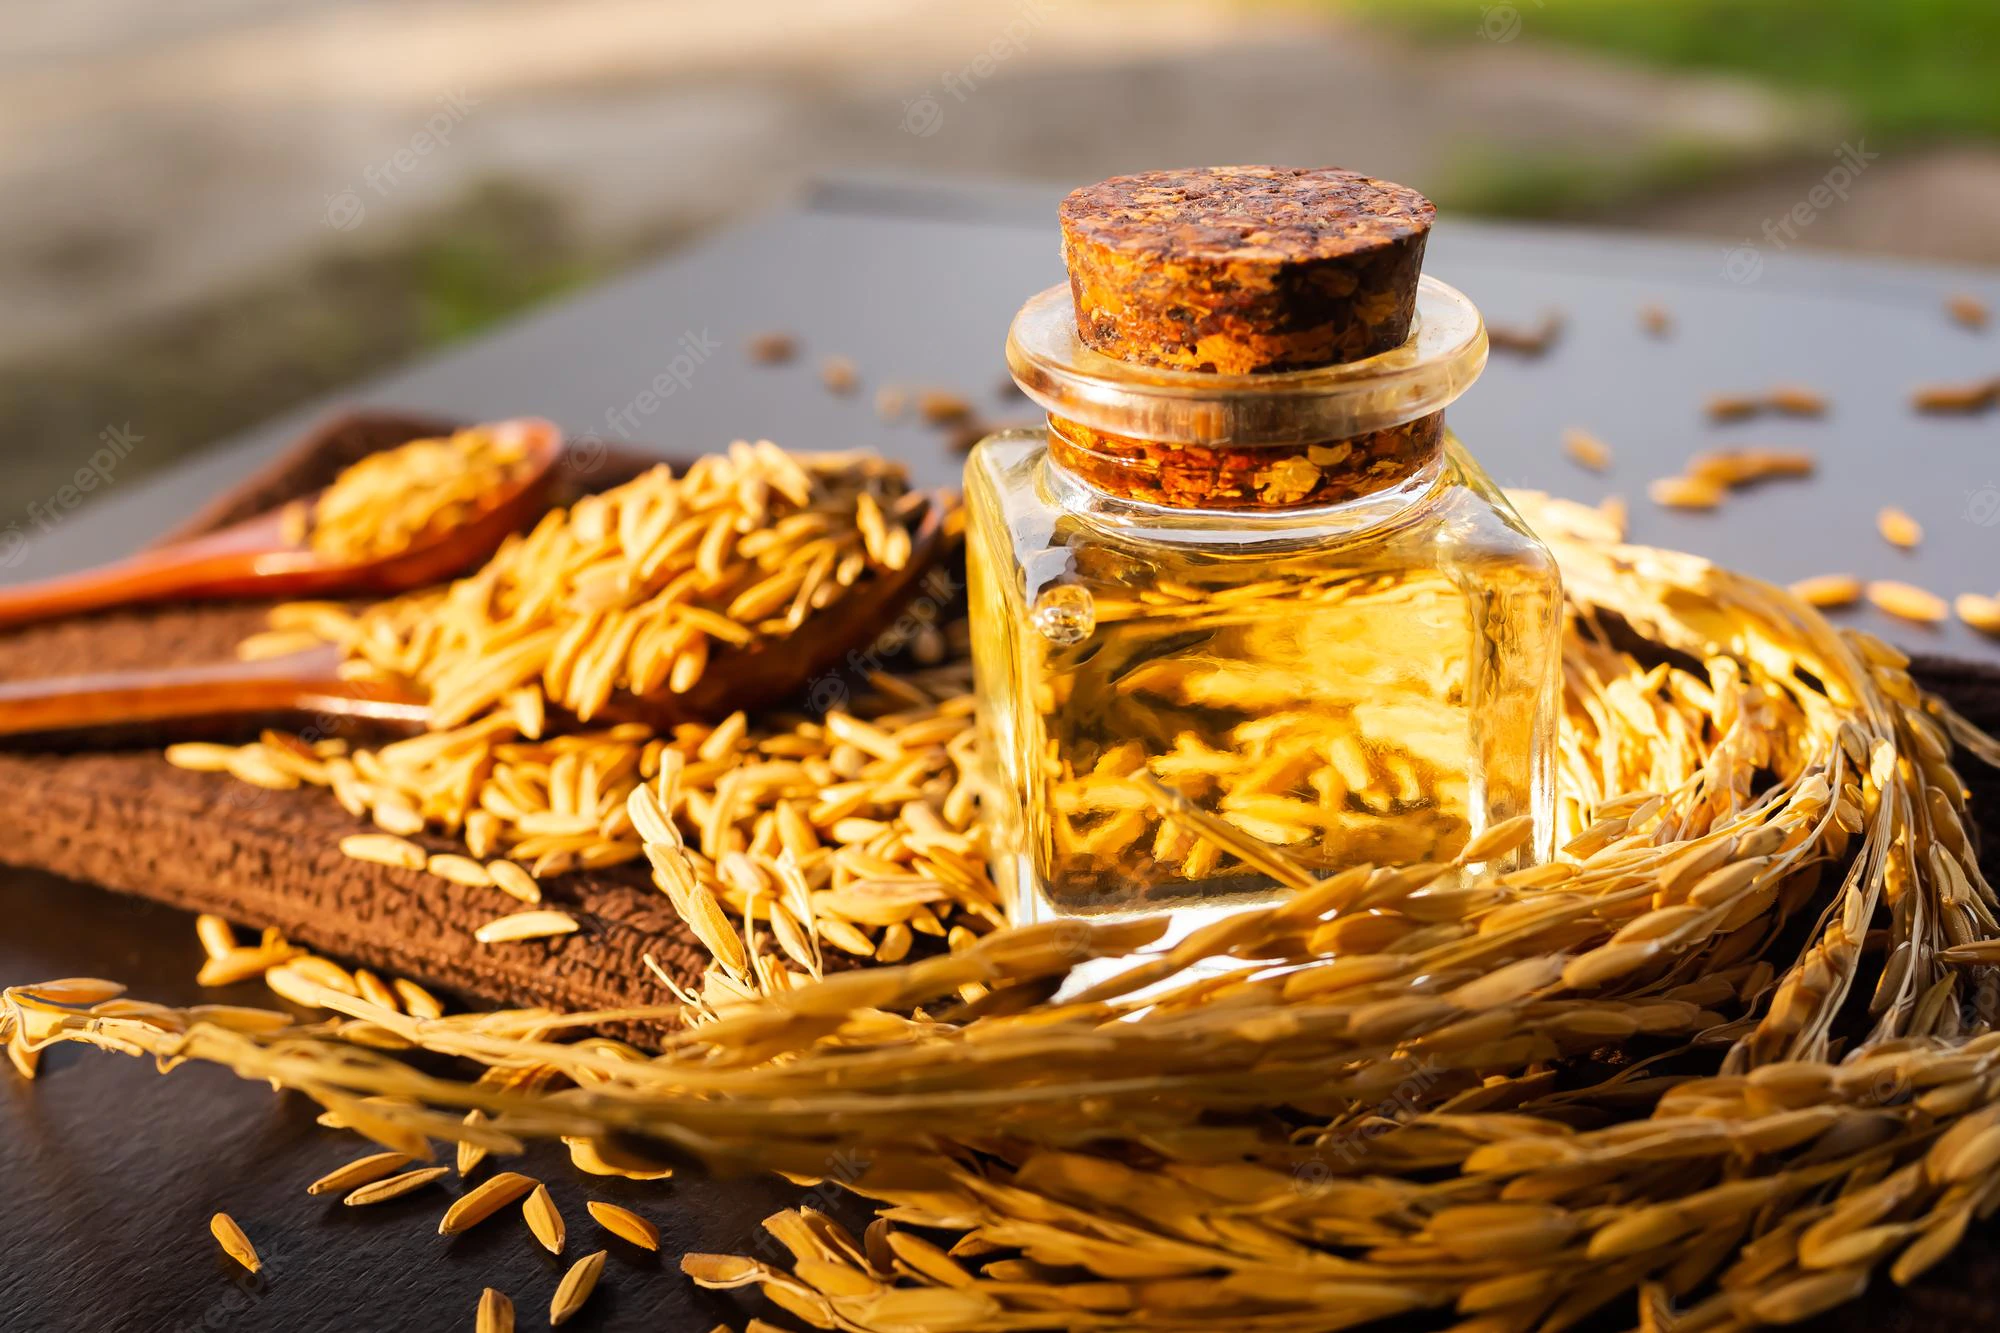 rice-bran-oil-bottle-glass-with-ears-rice-grain-wood-background-top-view-organic-herbal-meal-raw-food-ingredient-good-health_301927-631